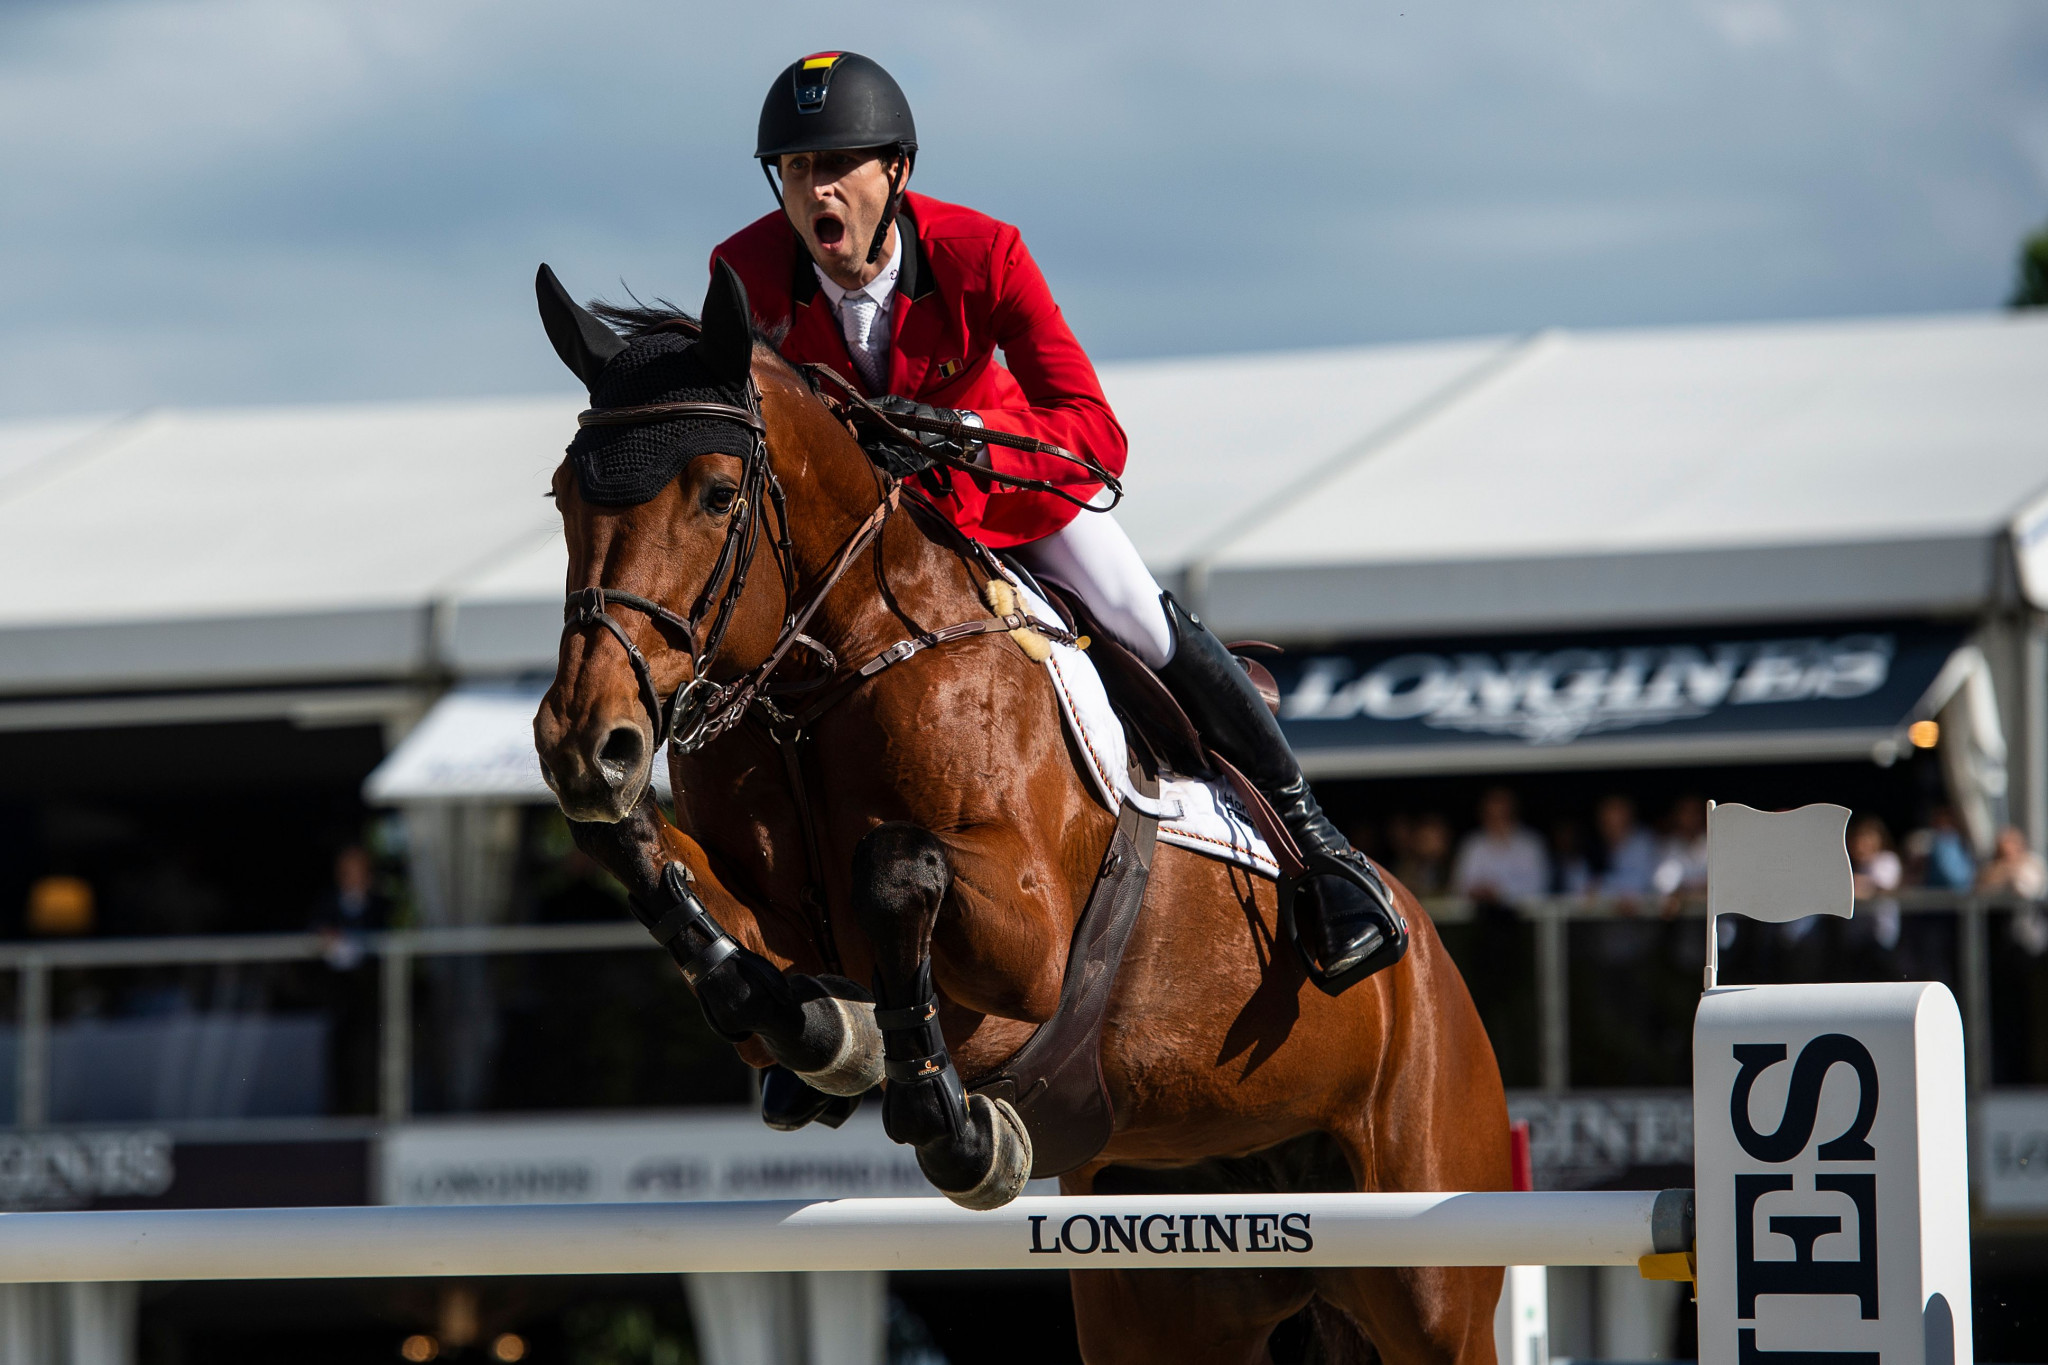 Belgium's Pieter Devos dropped to second in the Longines Global Champions Tour Championship after a disappointing display in Hamburg ©Getty Images